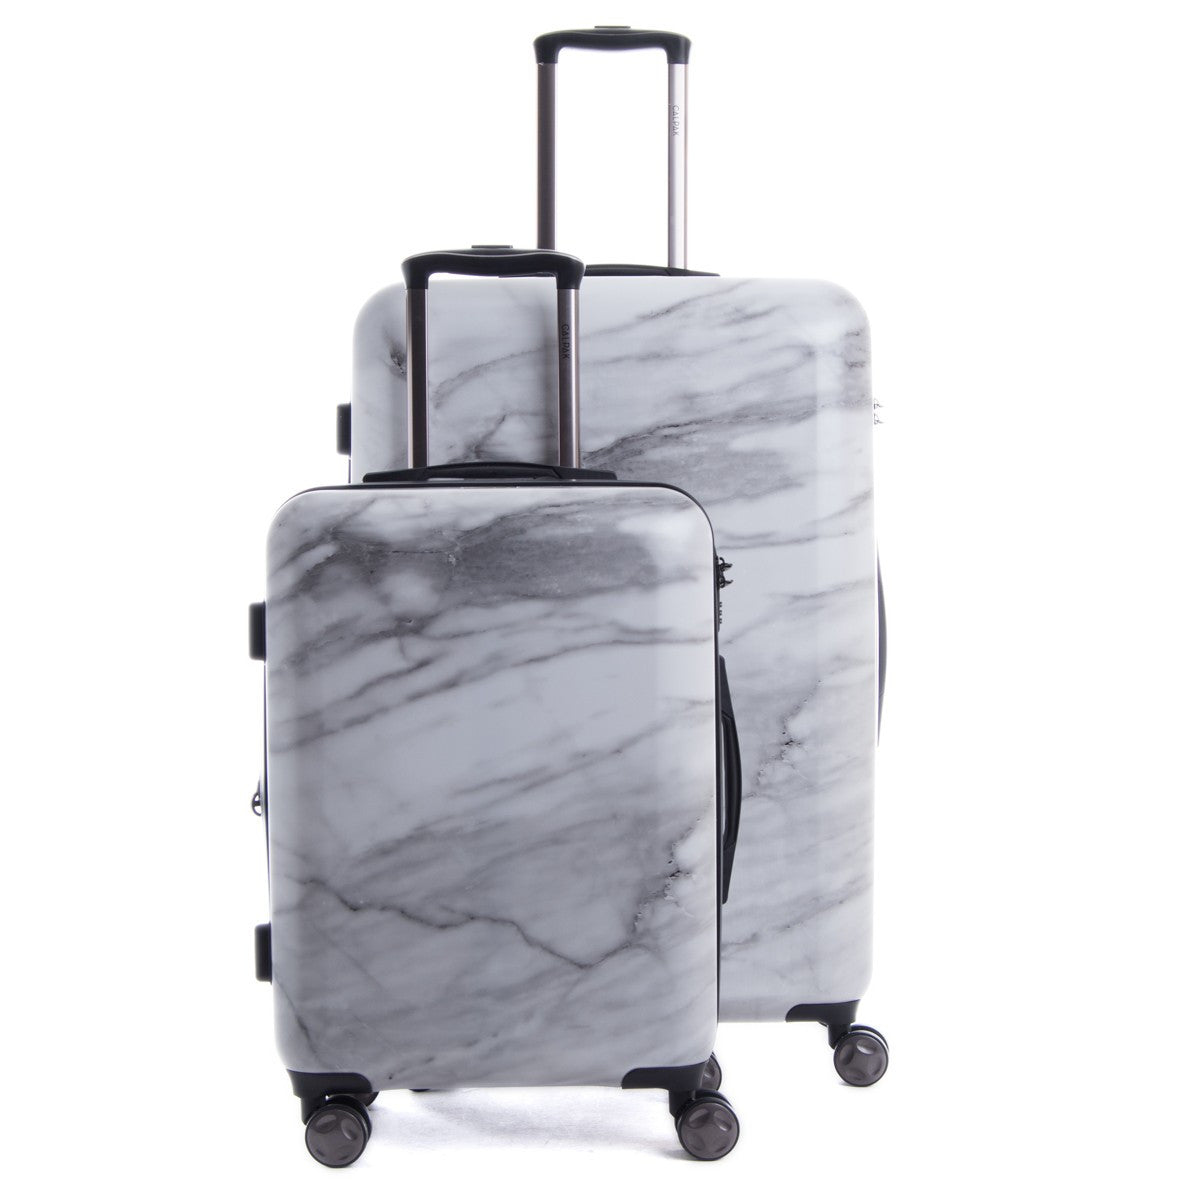 Astyll 2-Piece Luggage Set in Milk Marble